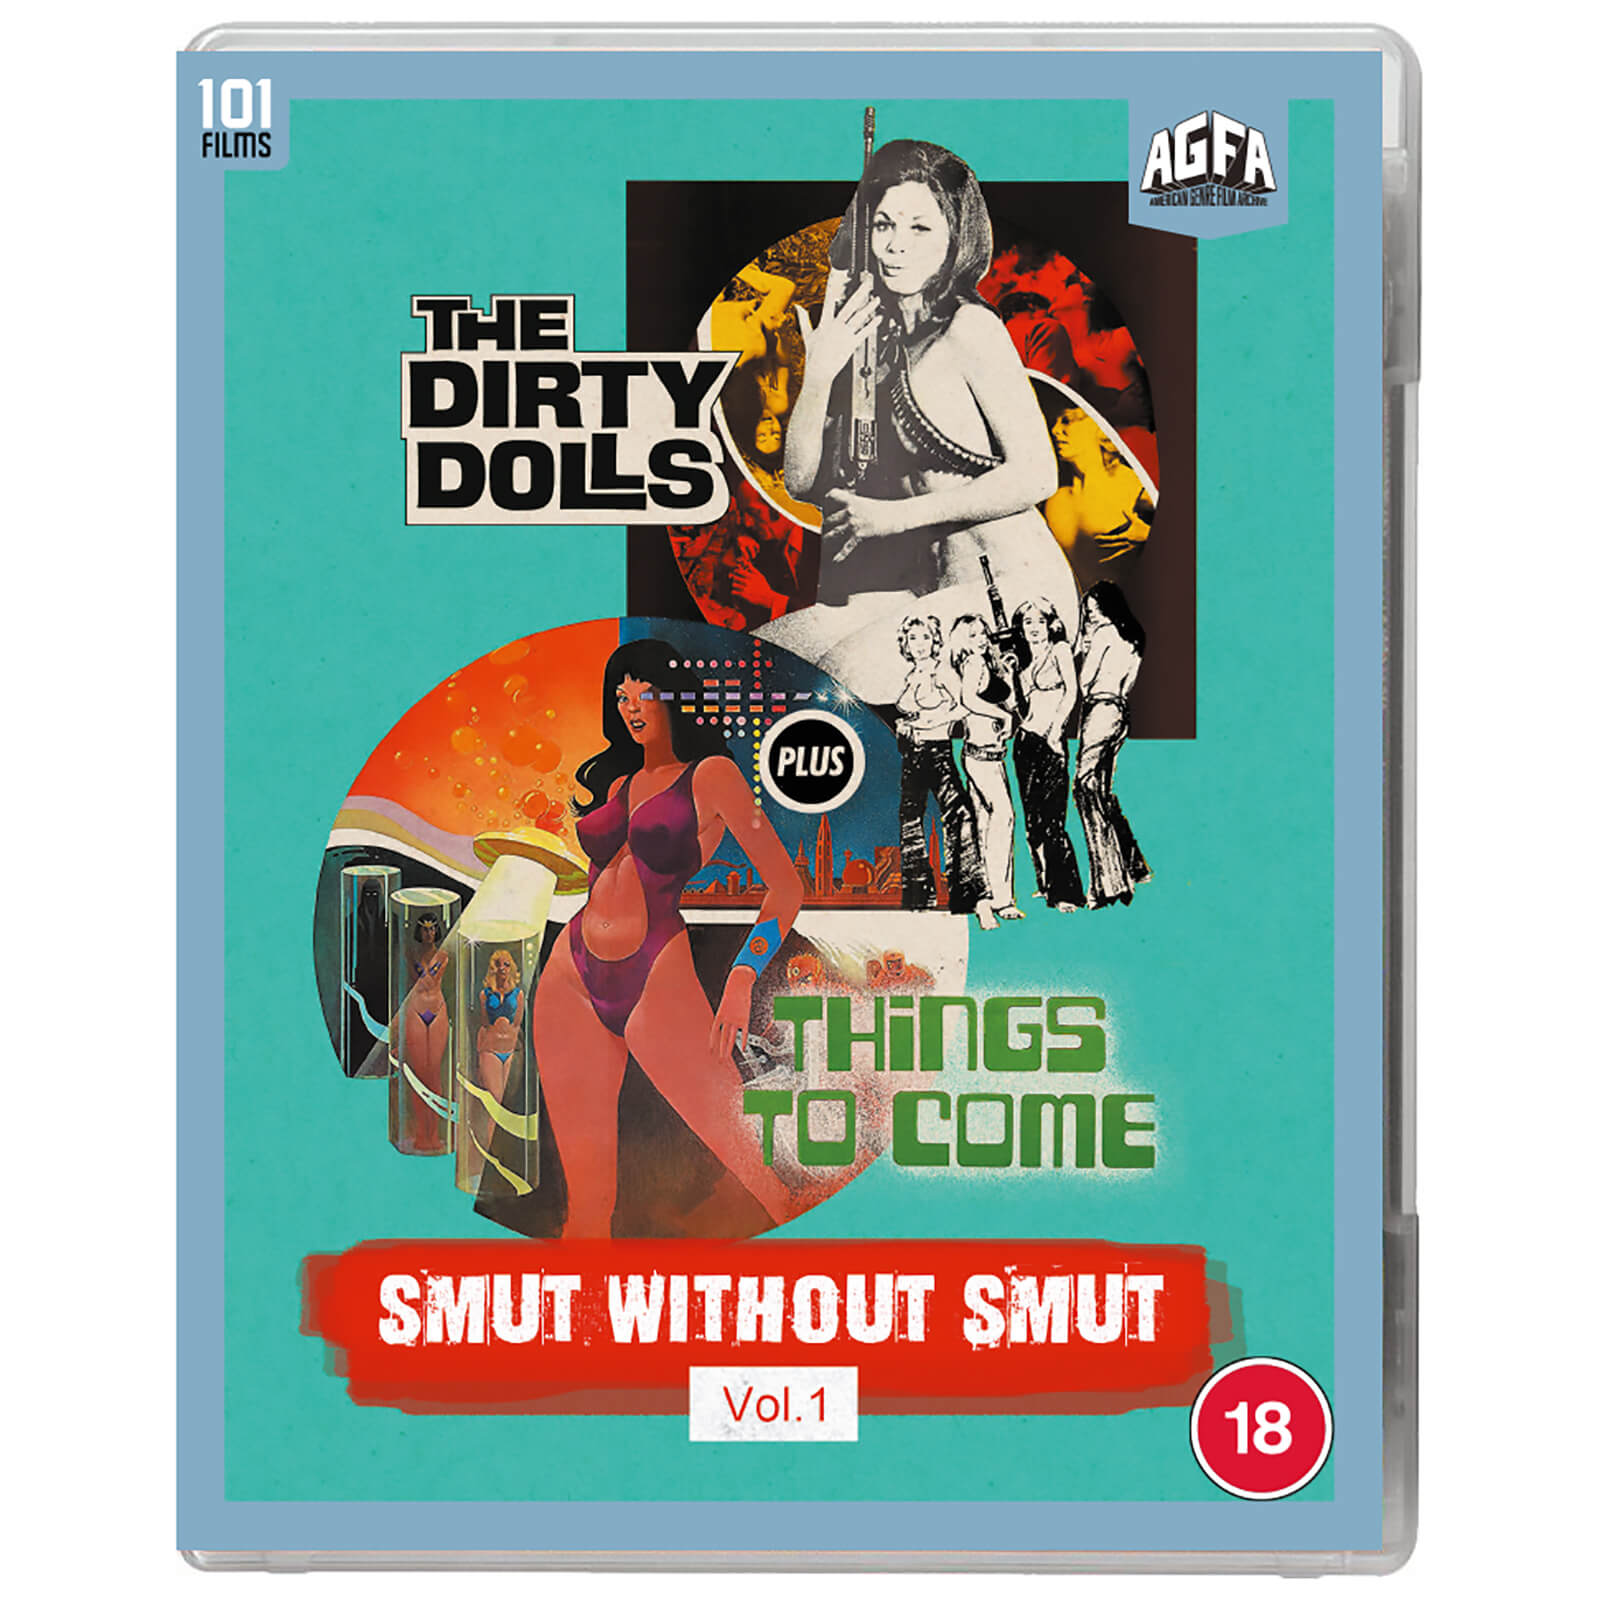 Smut Without Smut Vol. 1: Things to Come + The Dirty Dolls von 101 Films